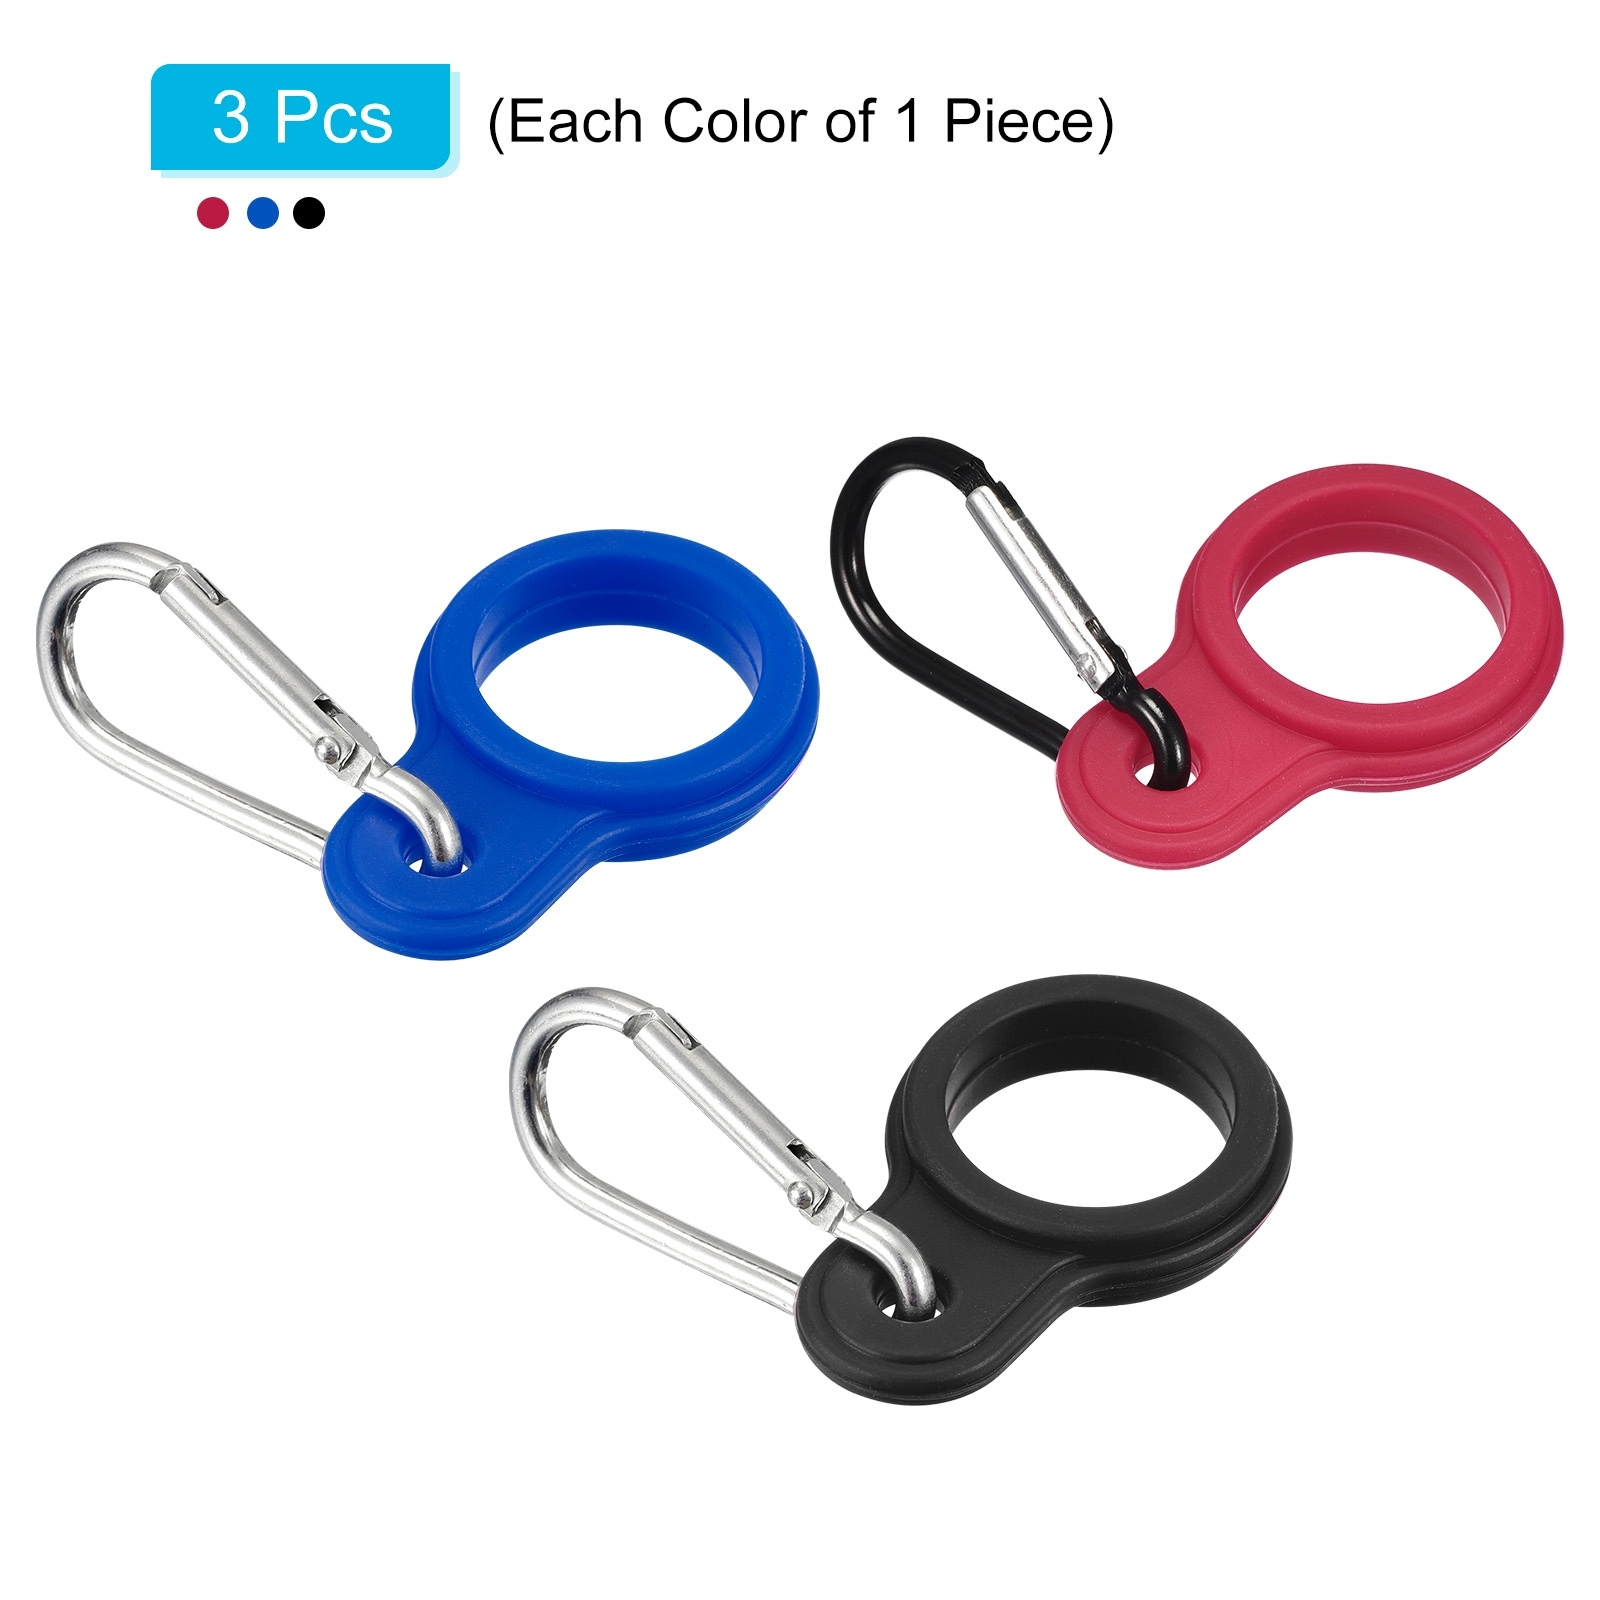 https://ak1.ostkcdn.com/images/products/is/images/direct/f48fb2a50c09d88404021103c7a5f12f537e160c/Silicone-Water-Bottle-Clip-with-Buckle-2pcs-Drink-Holder-Hook%2C-Black-Blue-Red.jpg